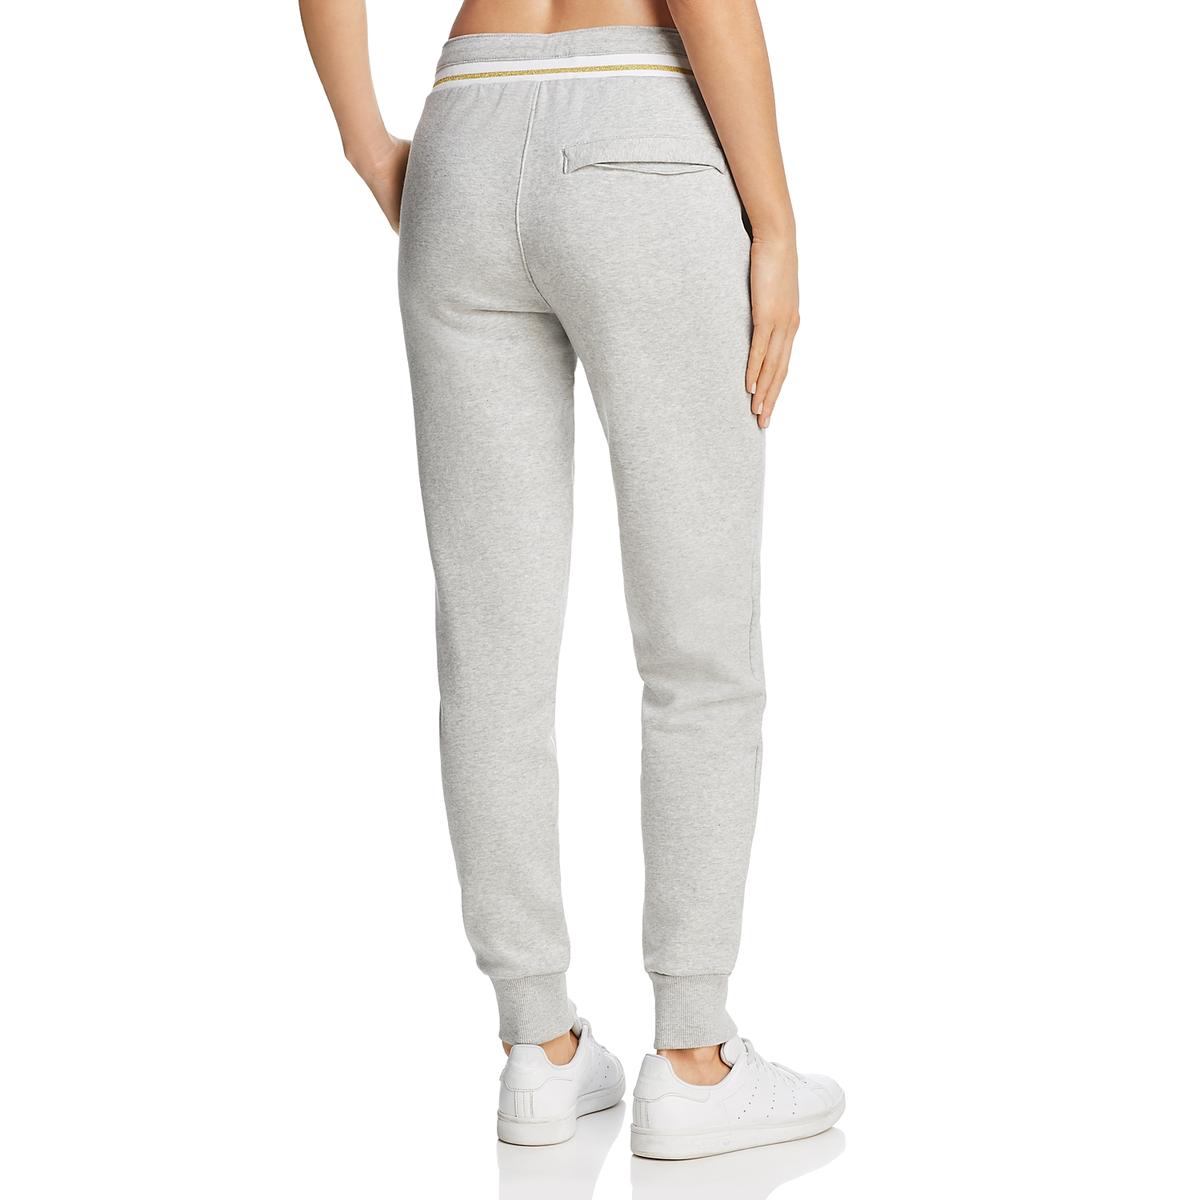 Fila Womens Gray Fitness Running Work Out Jogger Pants Athletic L BHFO ...